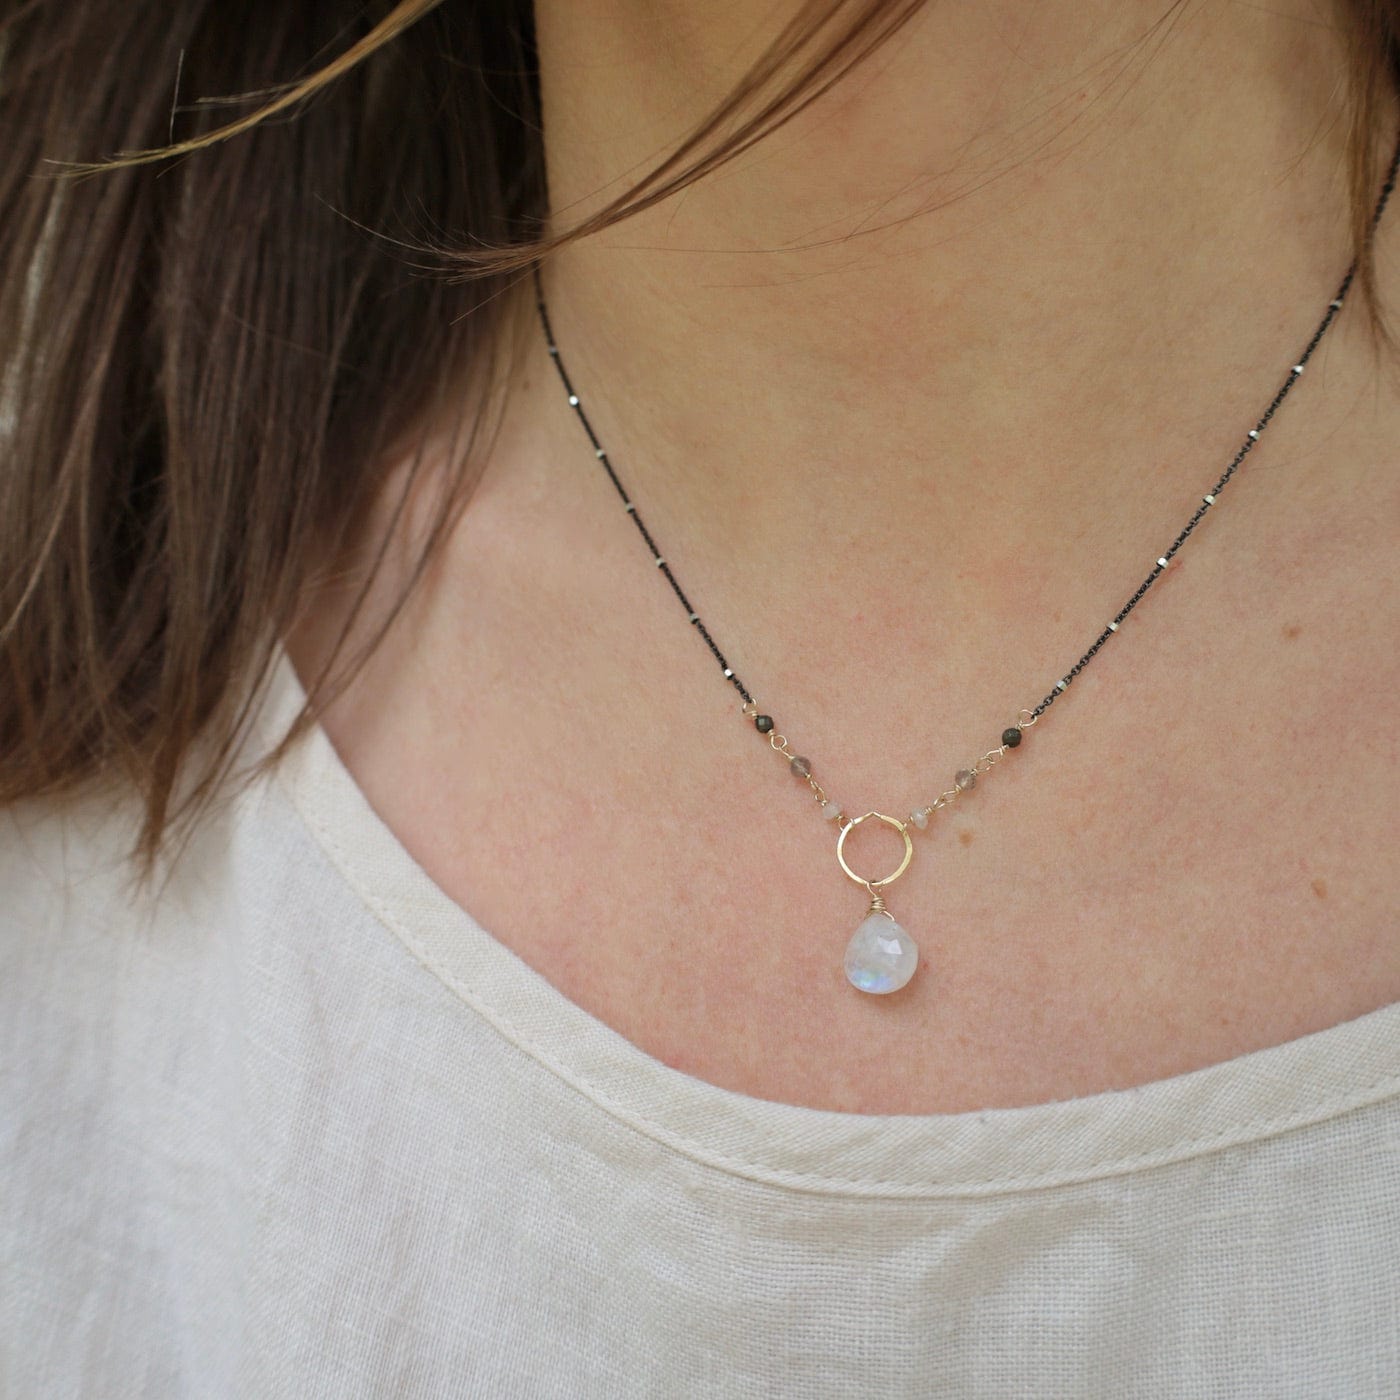 NKL-GF Gold Filled Ring with Rainbow Moonstone Drop Necklace